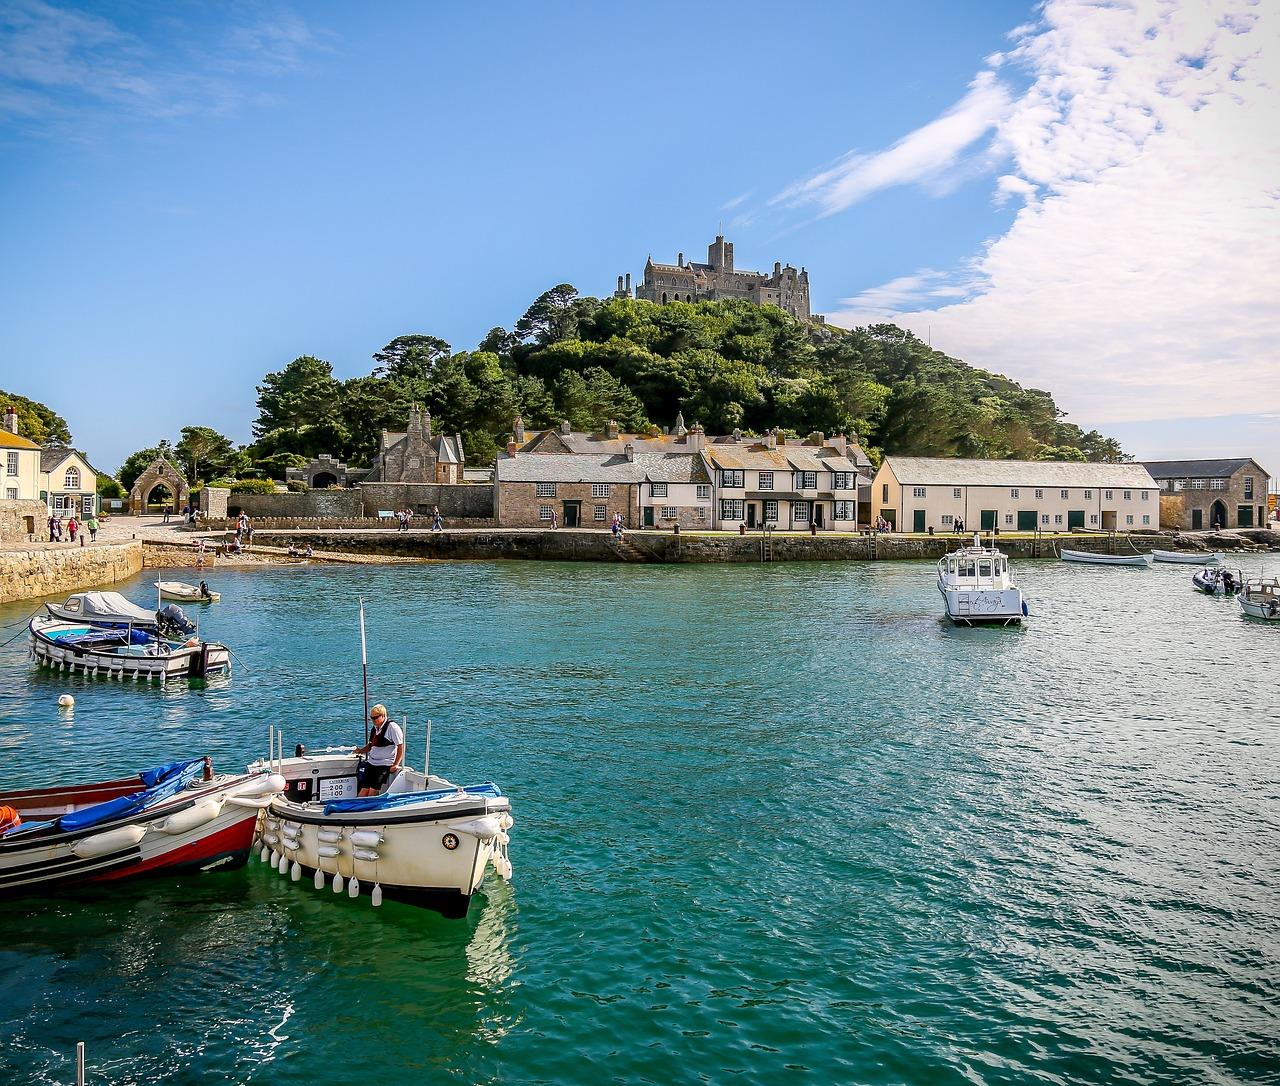 St michaels Mount in the golden afternoon sun